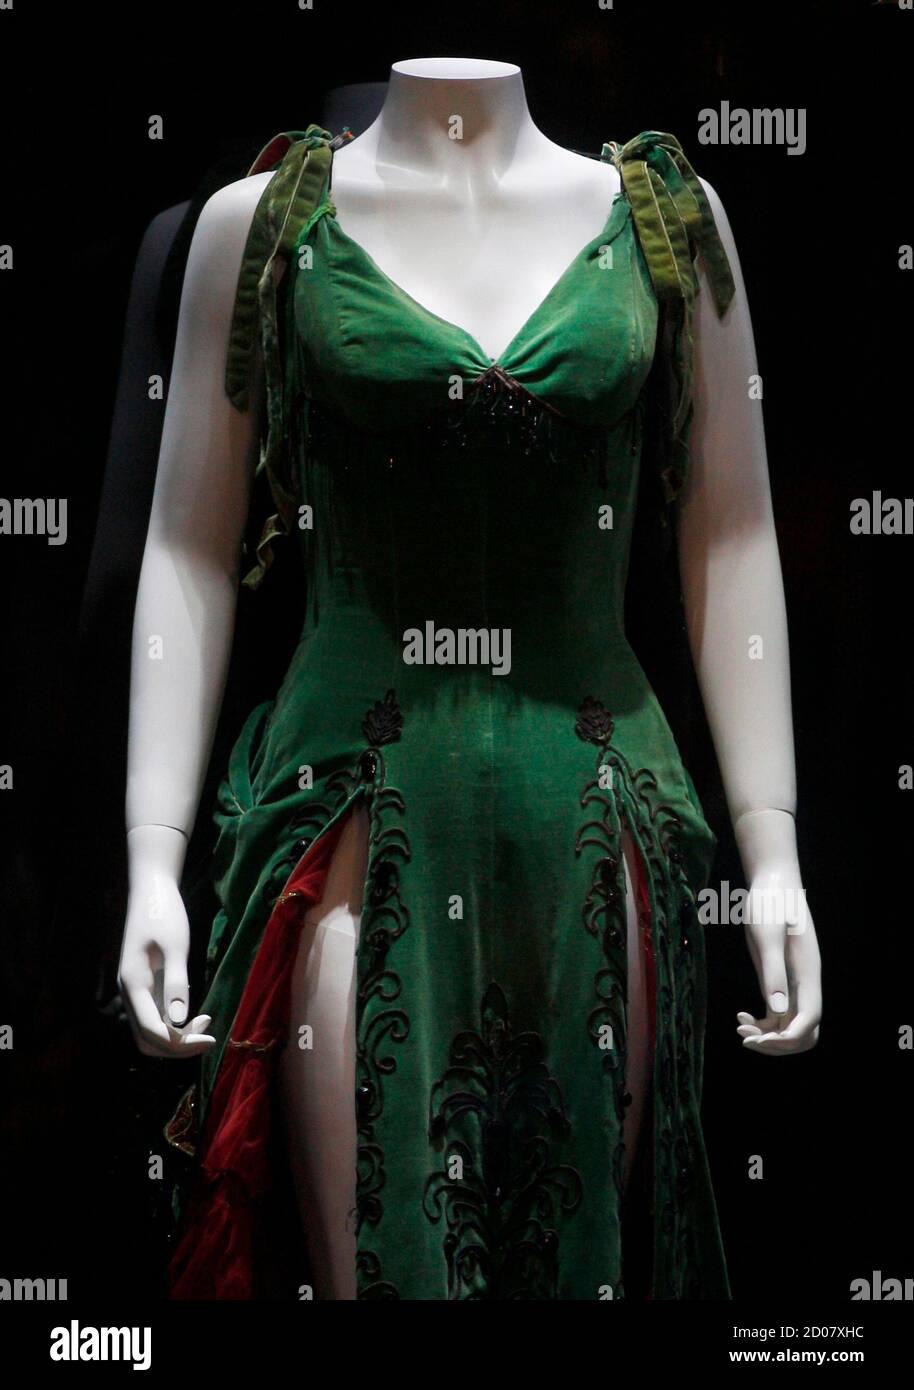 A green velour dress worn by actress Marilyn Monroe in her 1954 film 'River of No Return' is displayed at Julien's Auctions in Macau October 22, 2011. The dress, which is estimated to fetch $200,000- $300,000, will be put up for auction on Saturday with other pop memorabilia. REUTERS/Tyrone Siu (CHINA - Tags: ENTERTAINMENT FASHION SOCIETY) Stock Photo